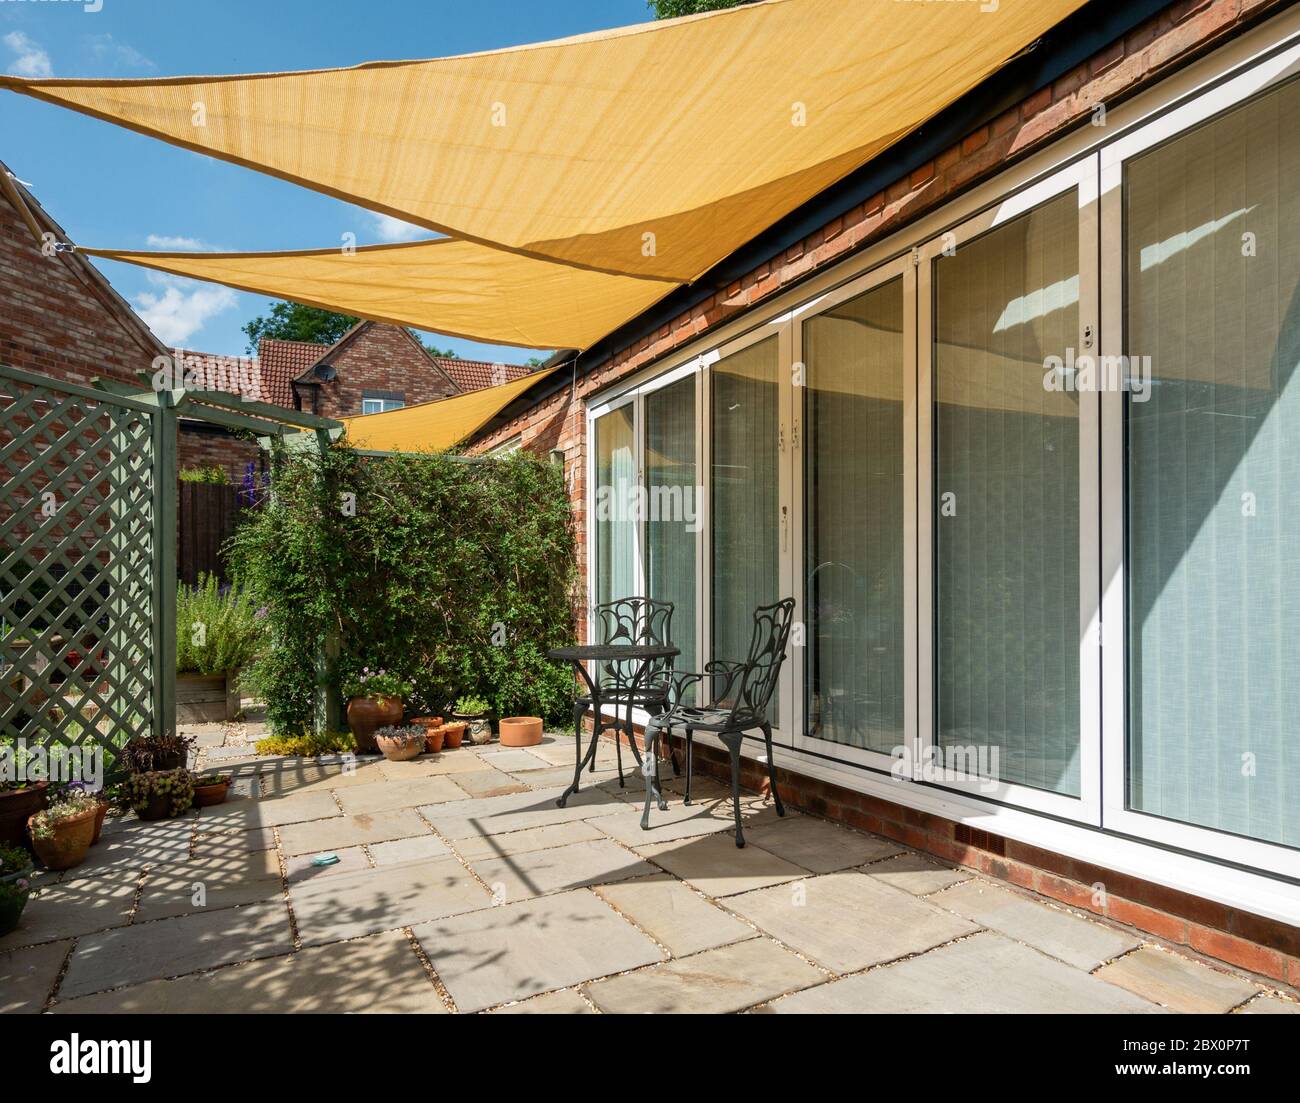 Small garden patio with yellow, triangular sail shade sunshades and blue sky above on a sunny Summer day, England, UK Stock Photo